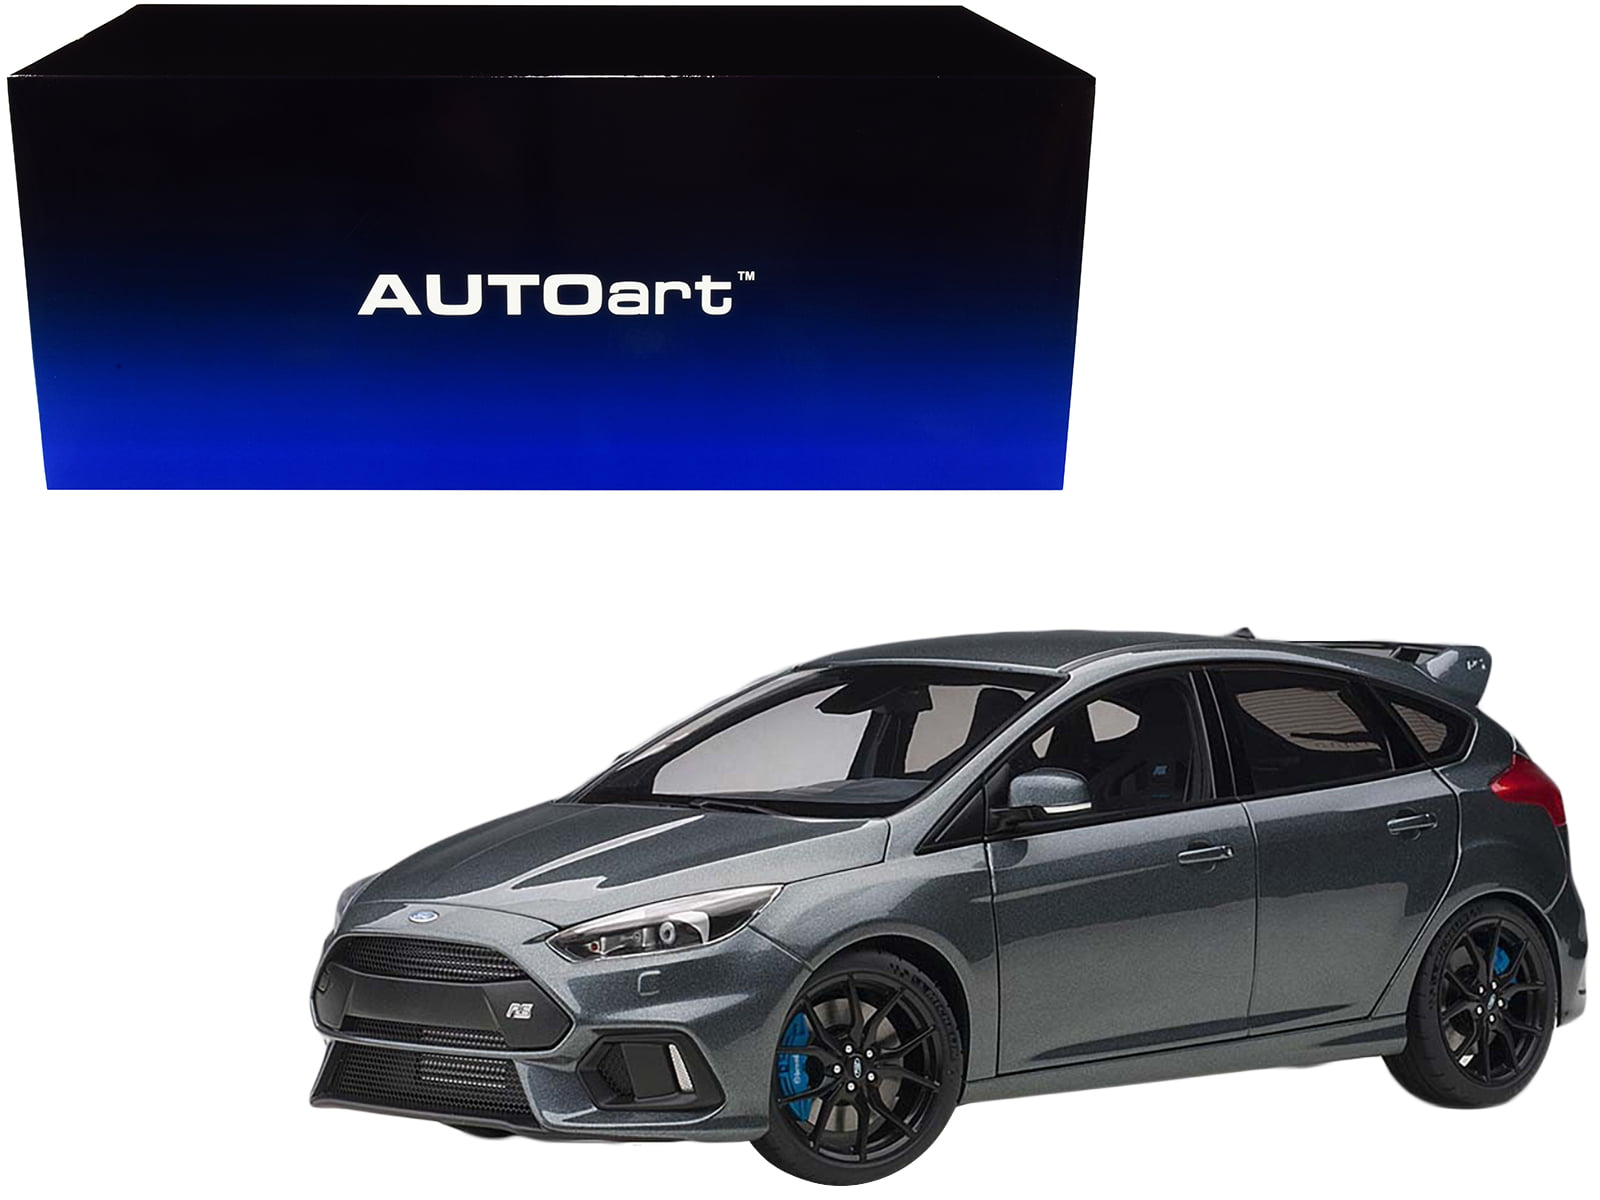 Picture of Autoart 72954 2016 Ford Focus RS Stealth 1 by 18 Scale Model Car, Gray Metallic